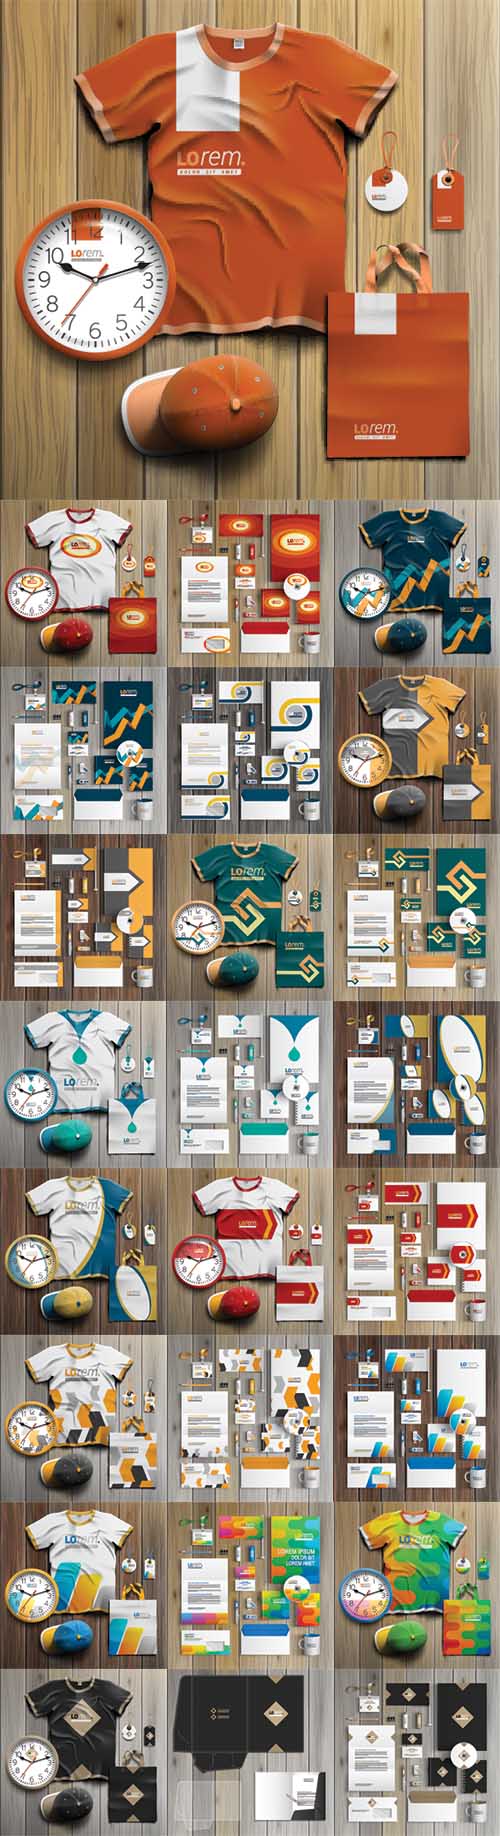 Stock Vectors - Corporate Templates For your Company